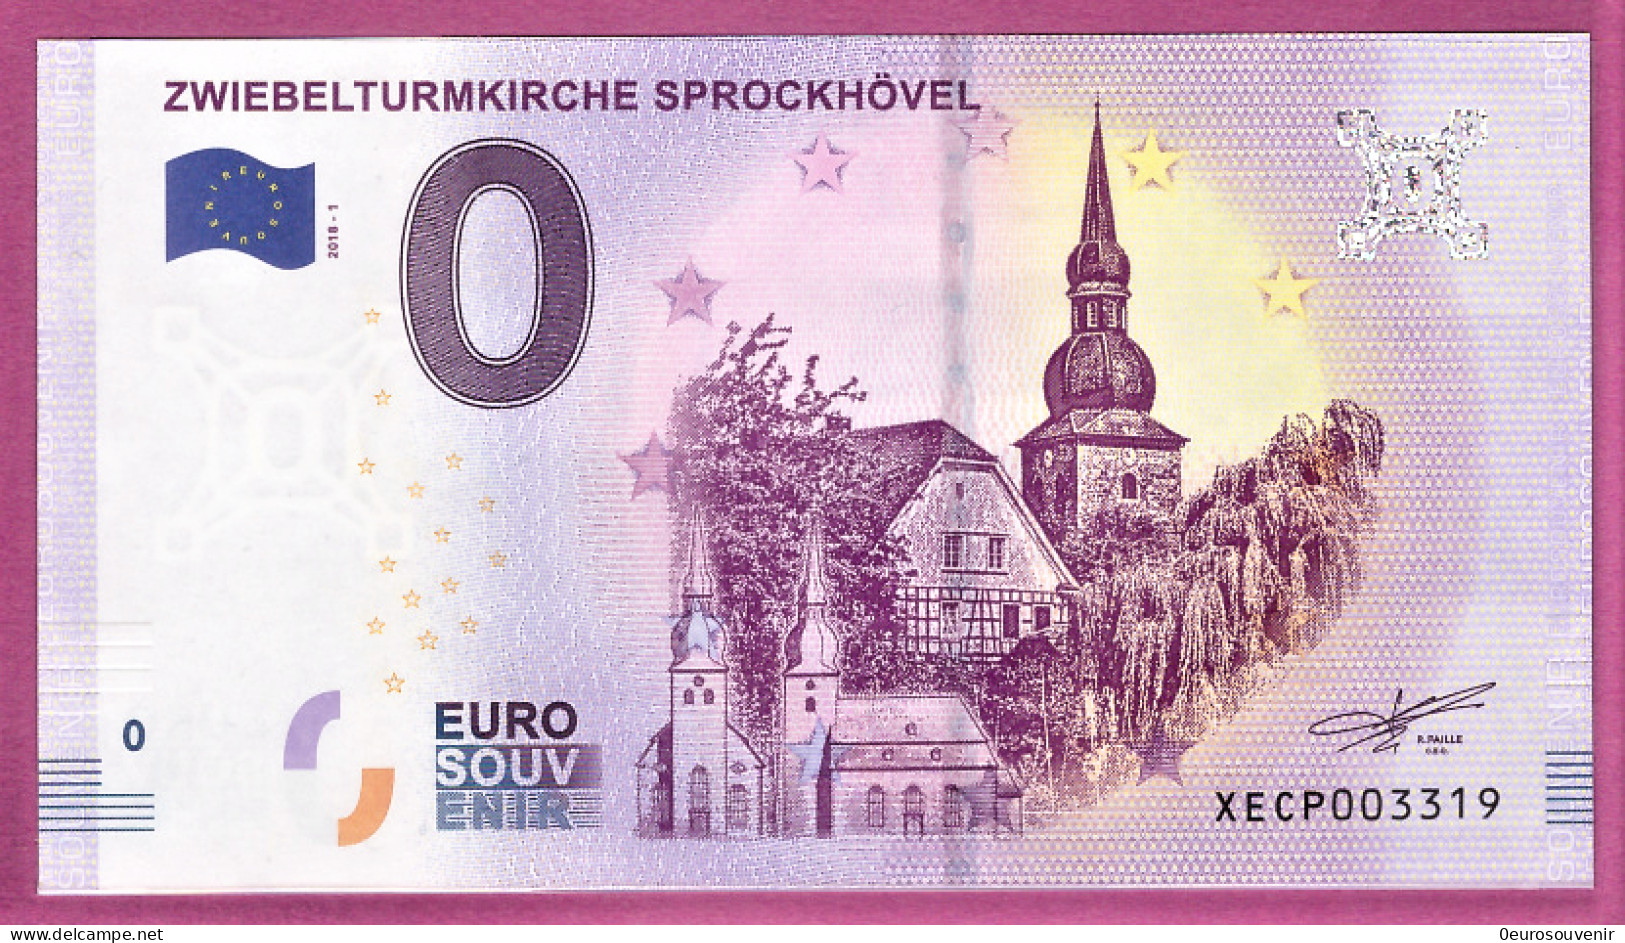 0-Euro XECP 2018-1 ZWIEBELTURMKIRCHE SPROCKHÖVEL - Private Proofs / Unofficial